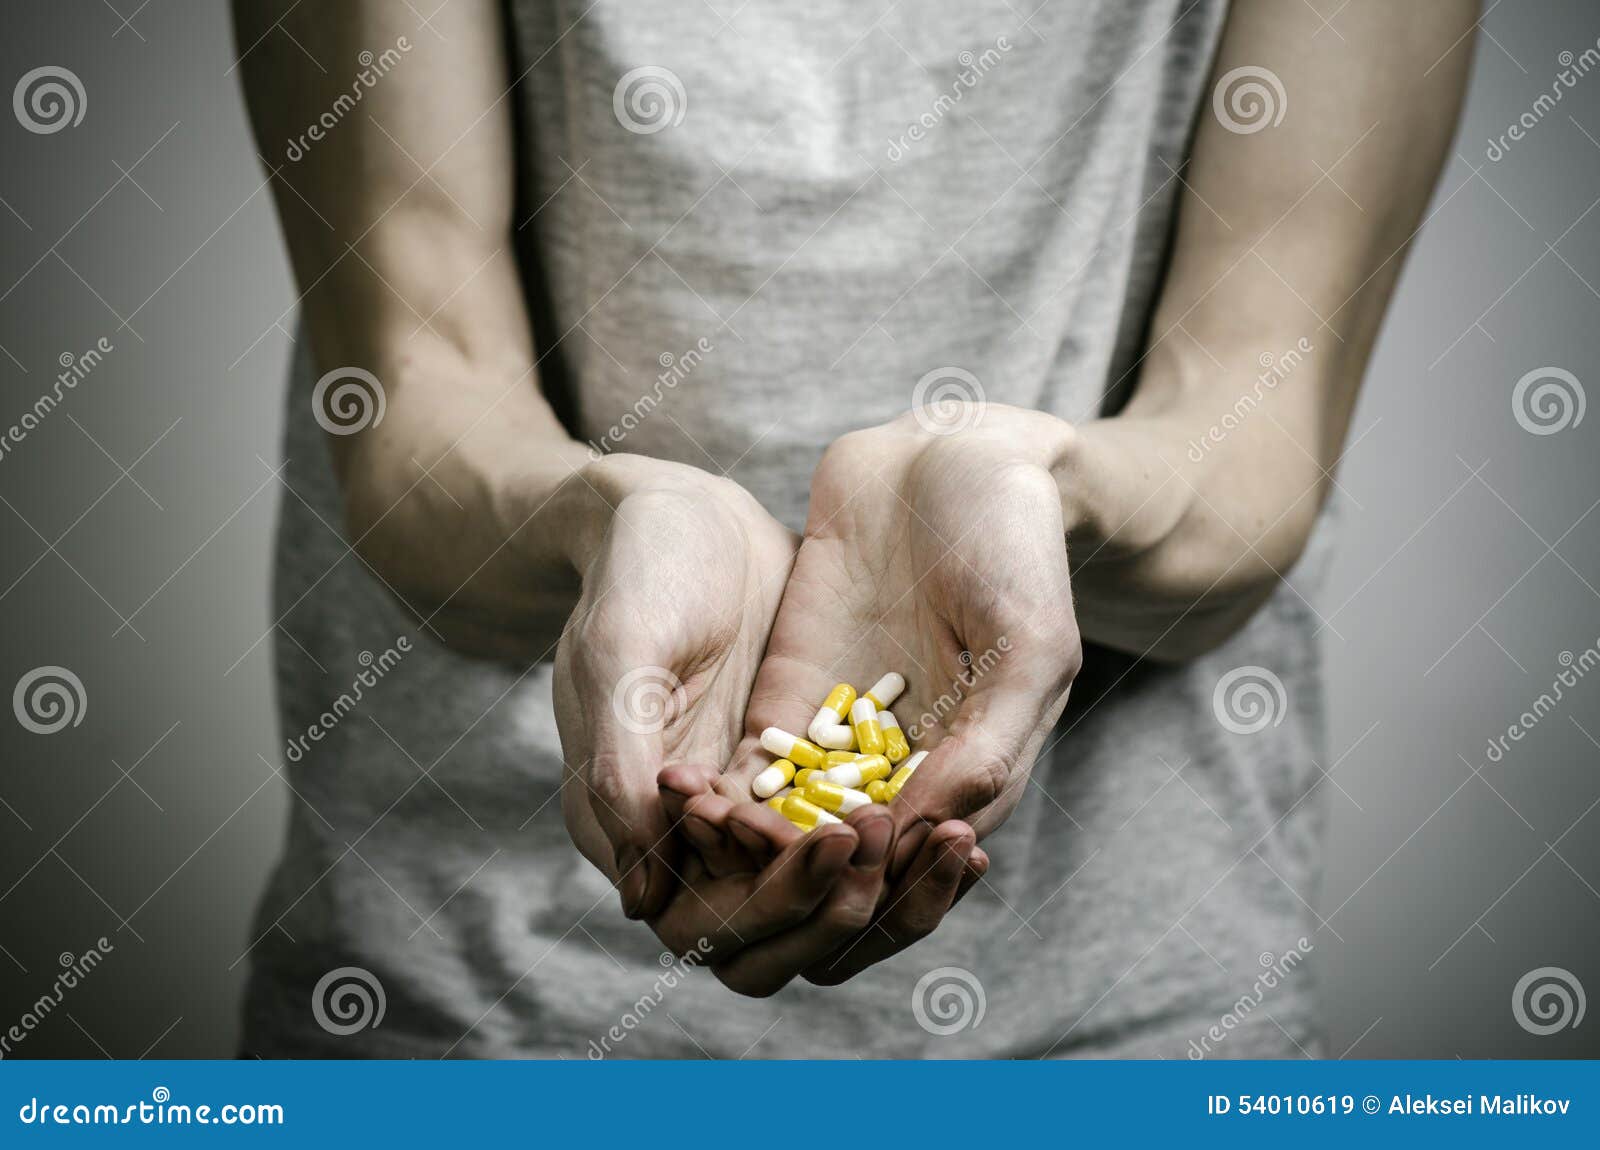 the fight against drugs and drug addiction topic: addict holding a narcotic pills on a dark background